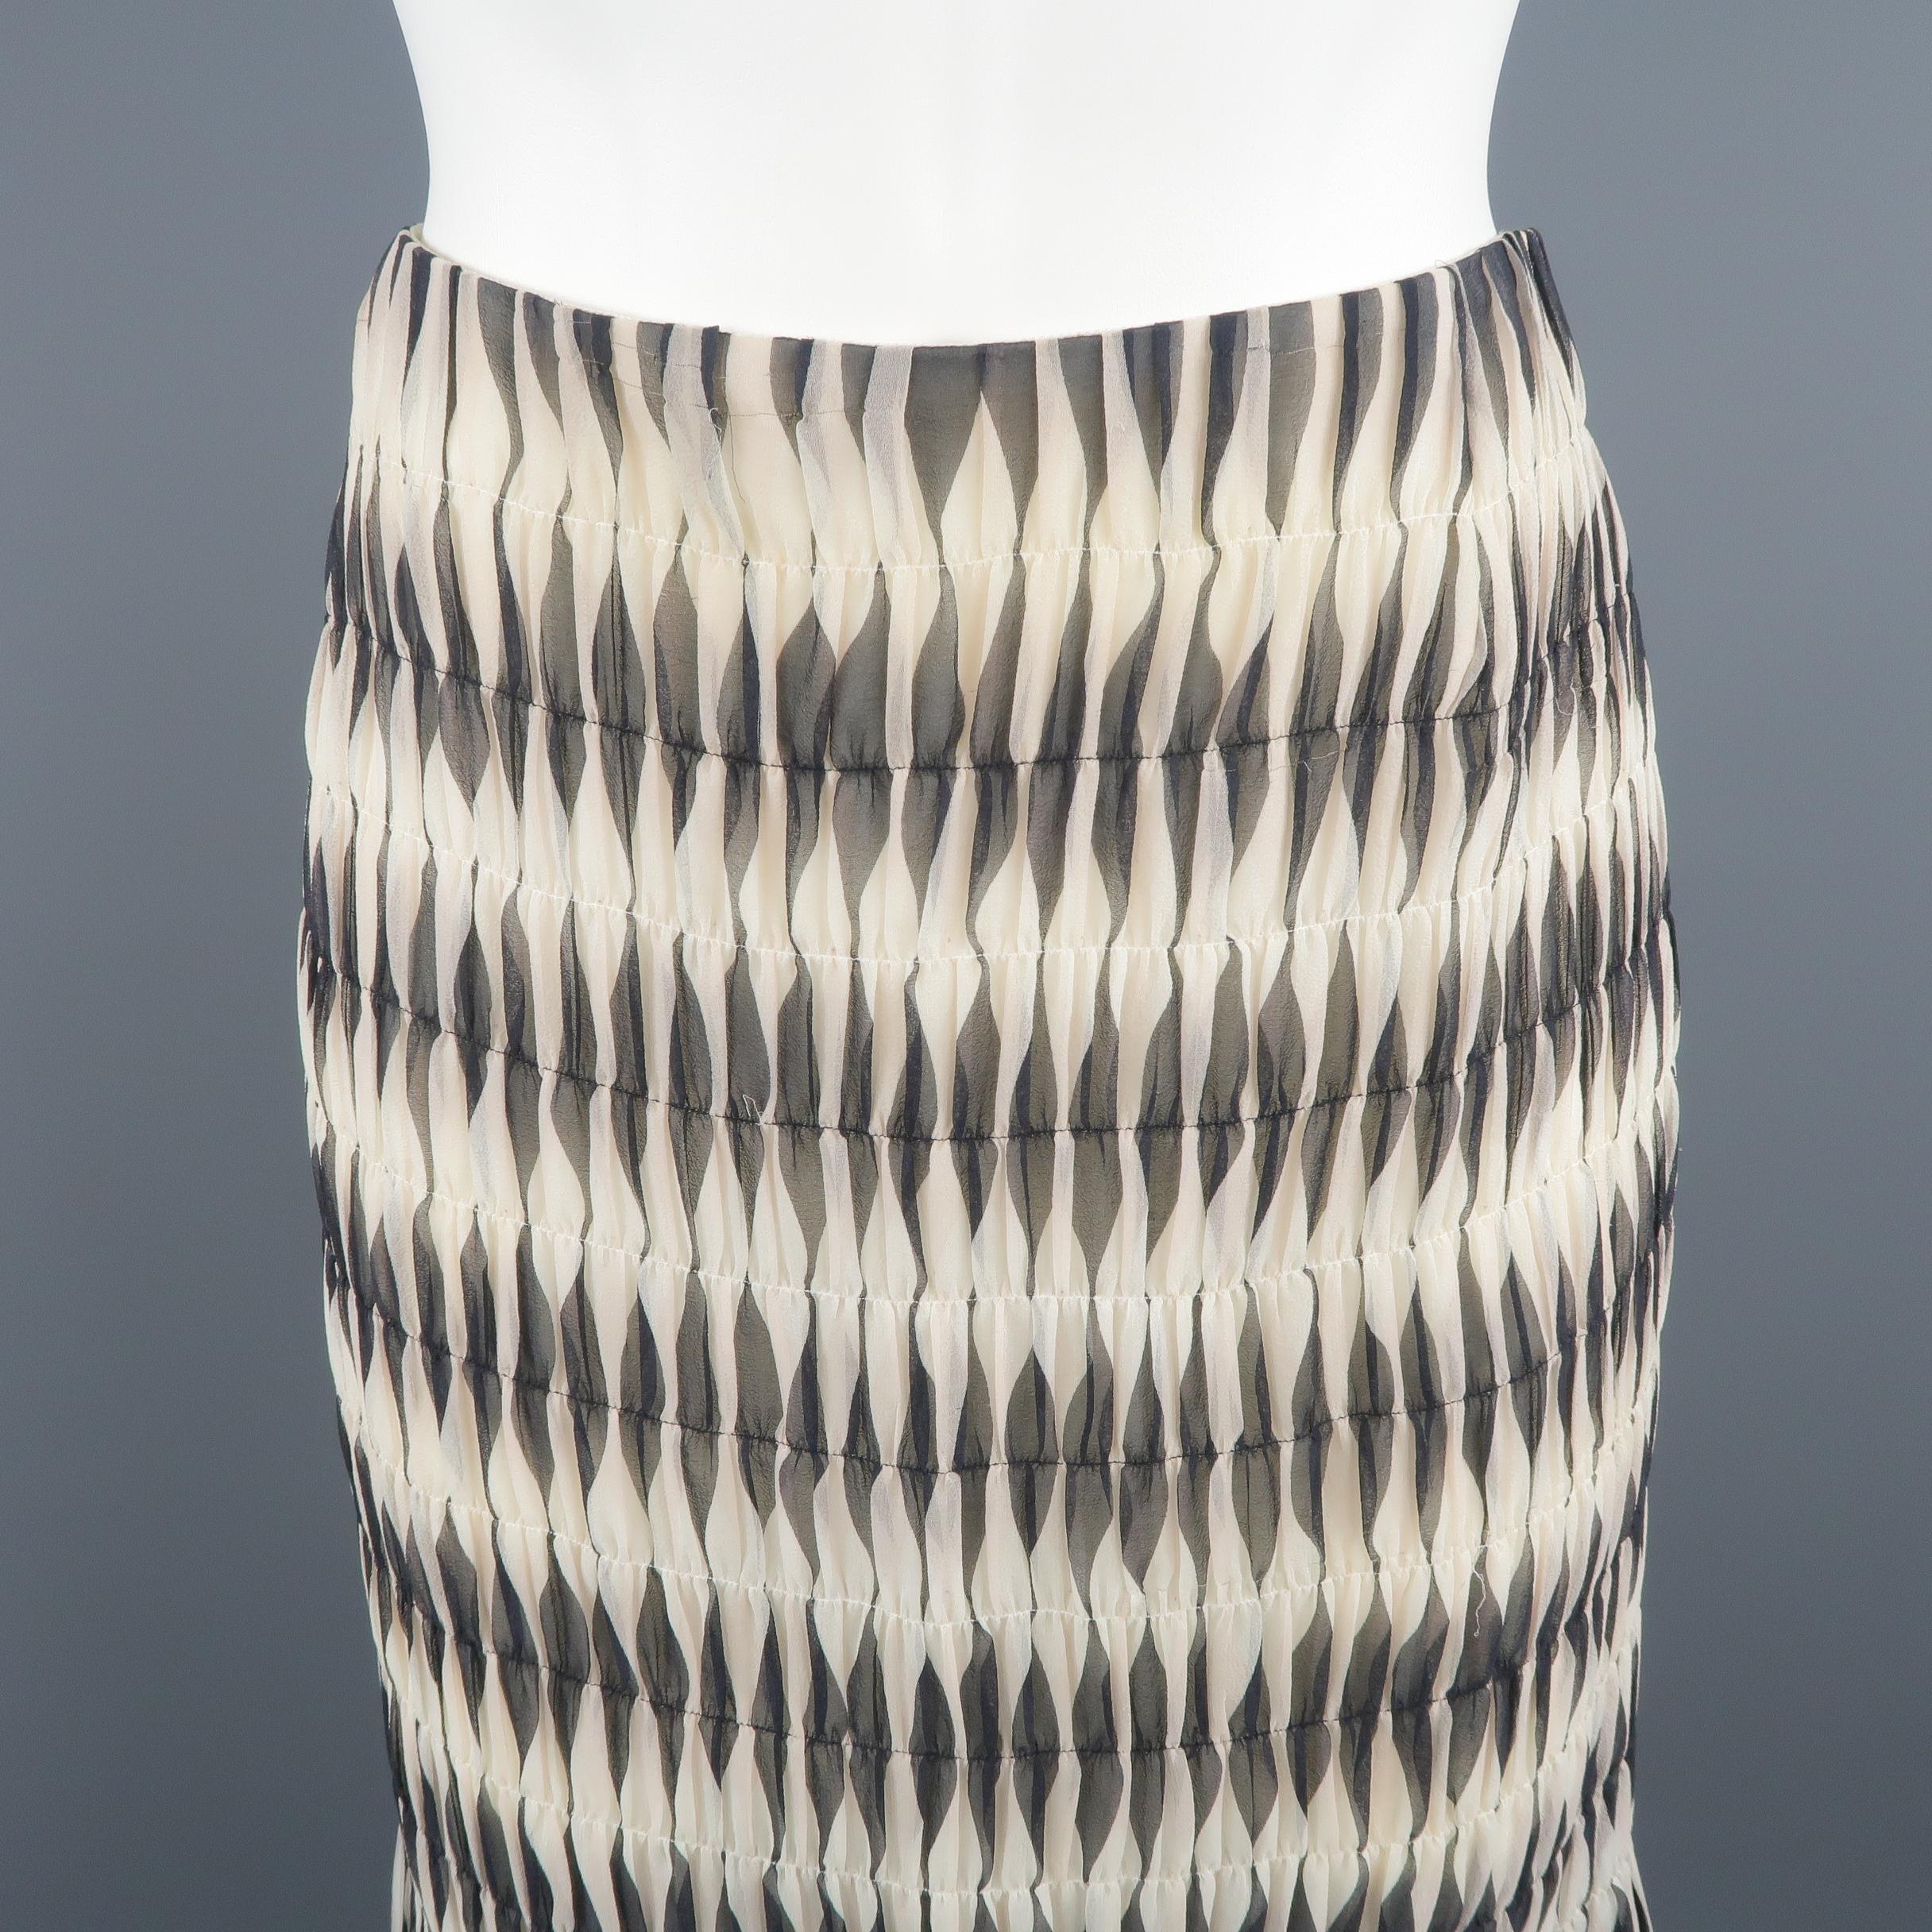 AKRIS A-line skirt, come in black and white tones, geometric print in silk chiffon material, and lateral zipper. Small signals of use, with a little bit of peeling on the top. Made in Switzerland.
 
Good Pre-Owned Condition.
Marked: 8 US
